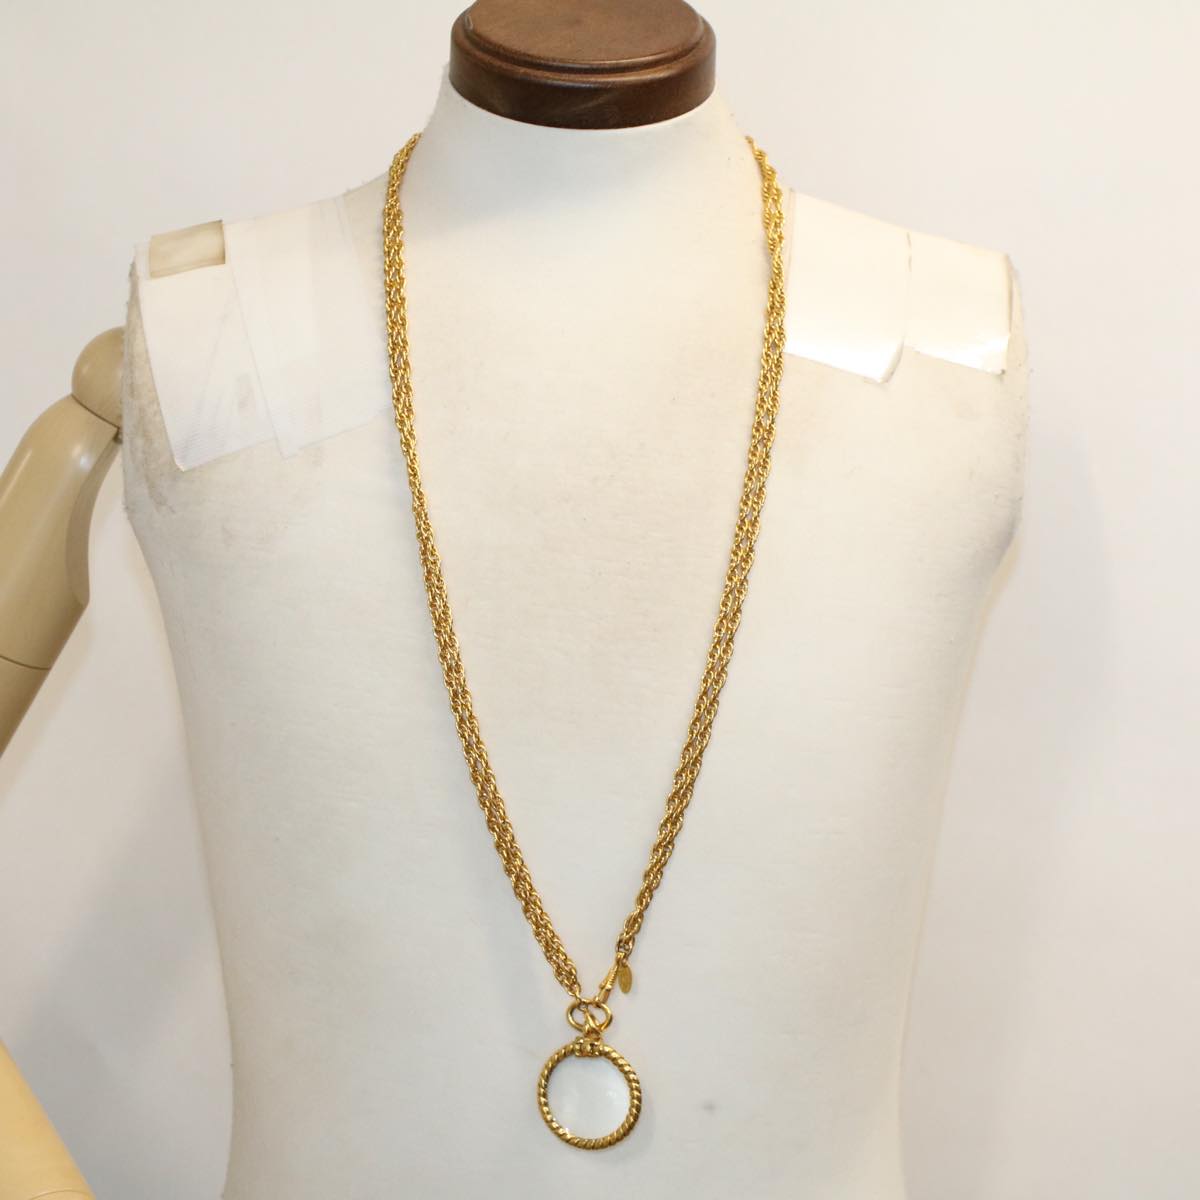 CHANEL Magnifying Glass Chain Necklace Metal Gold Tone CC Auth ar9782